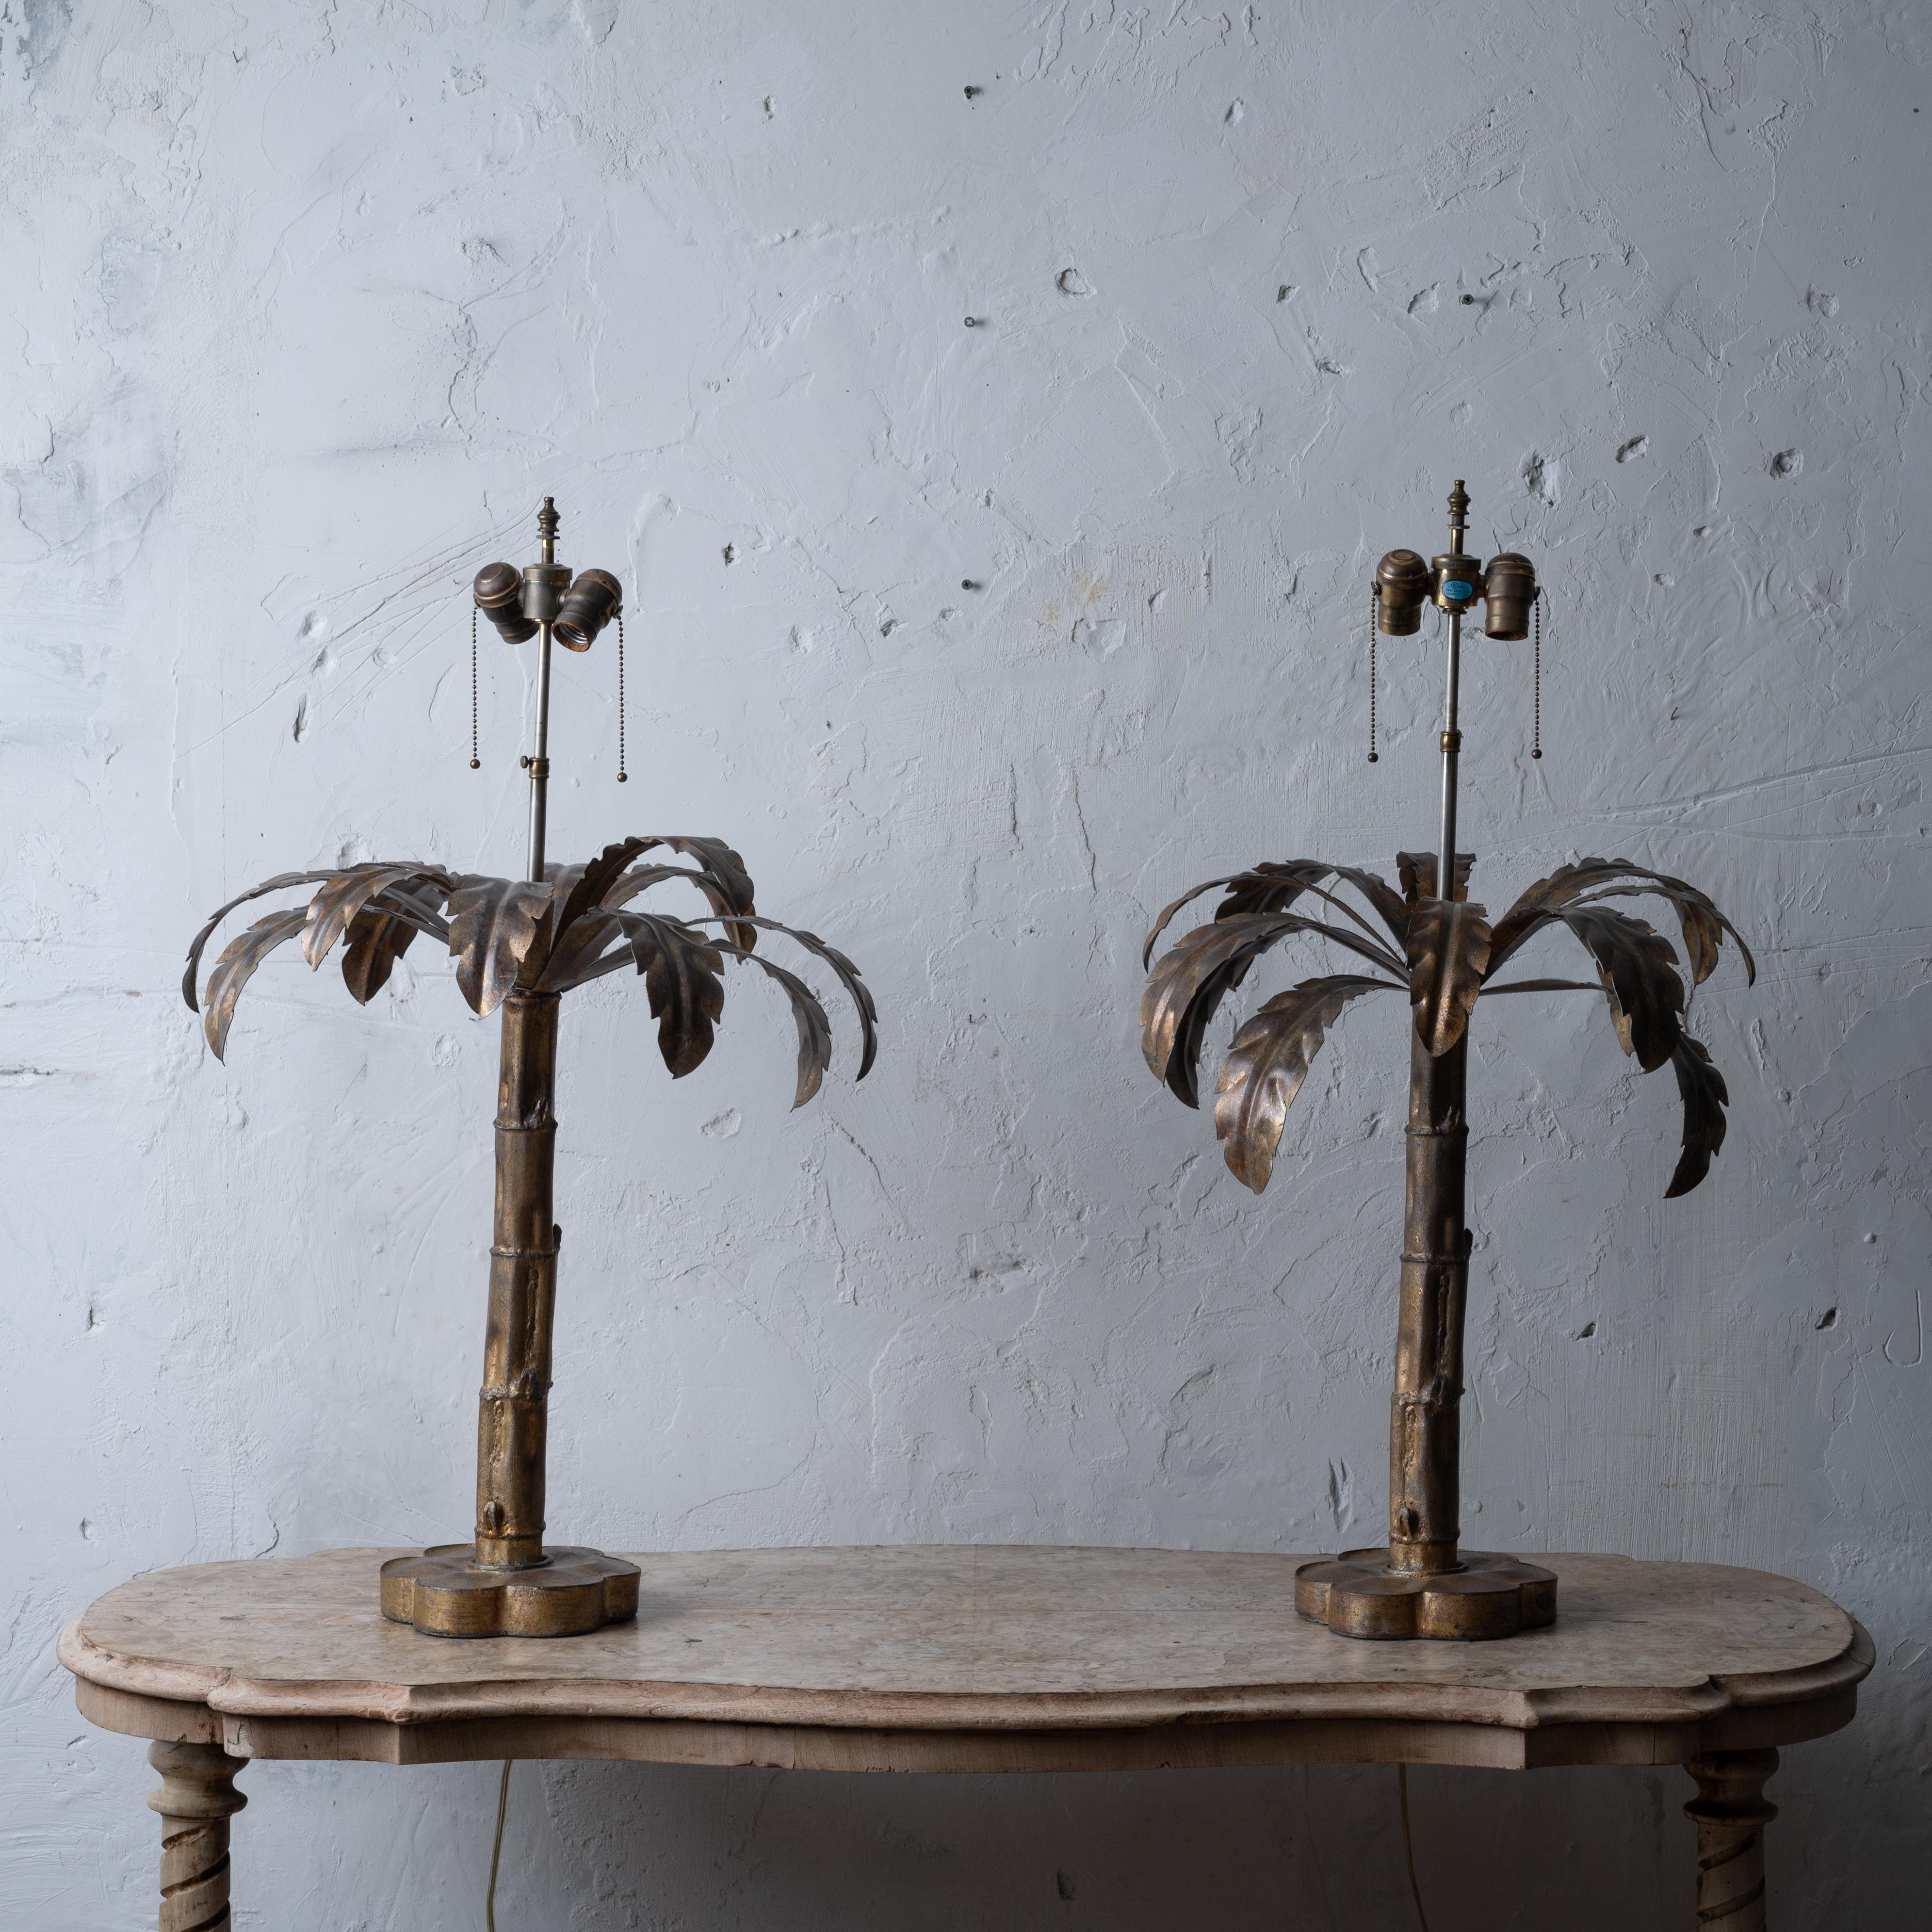 Niermann Weeks Palm Tree Table Lamps - A Pair In Good Condition For Sale In Savannah, GA